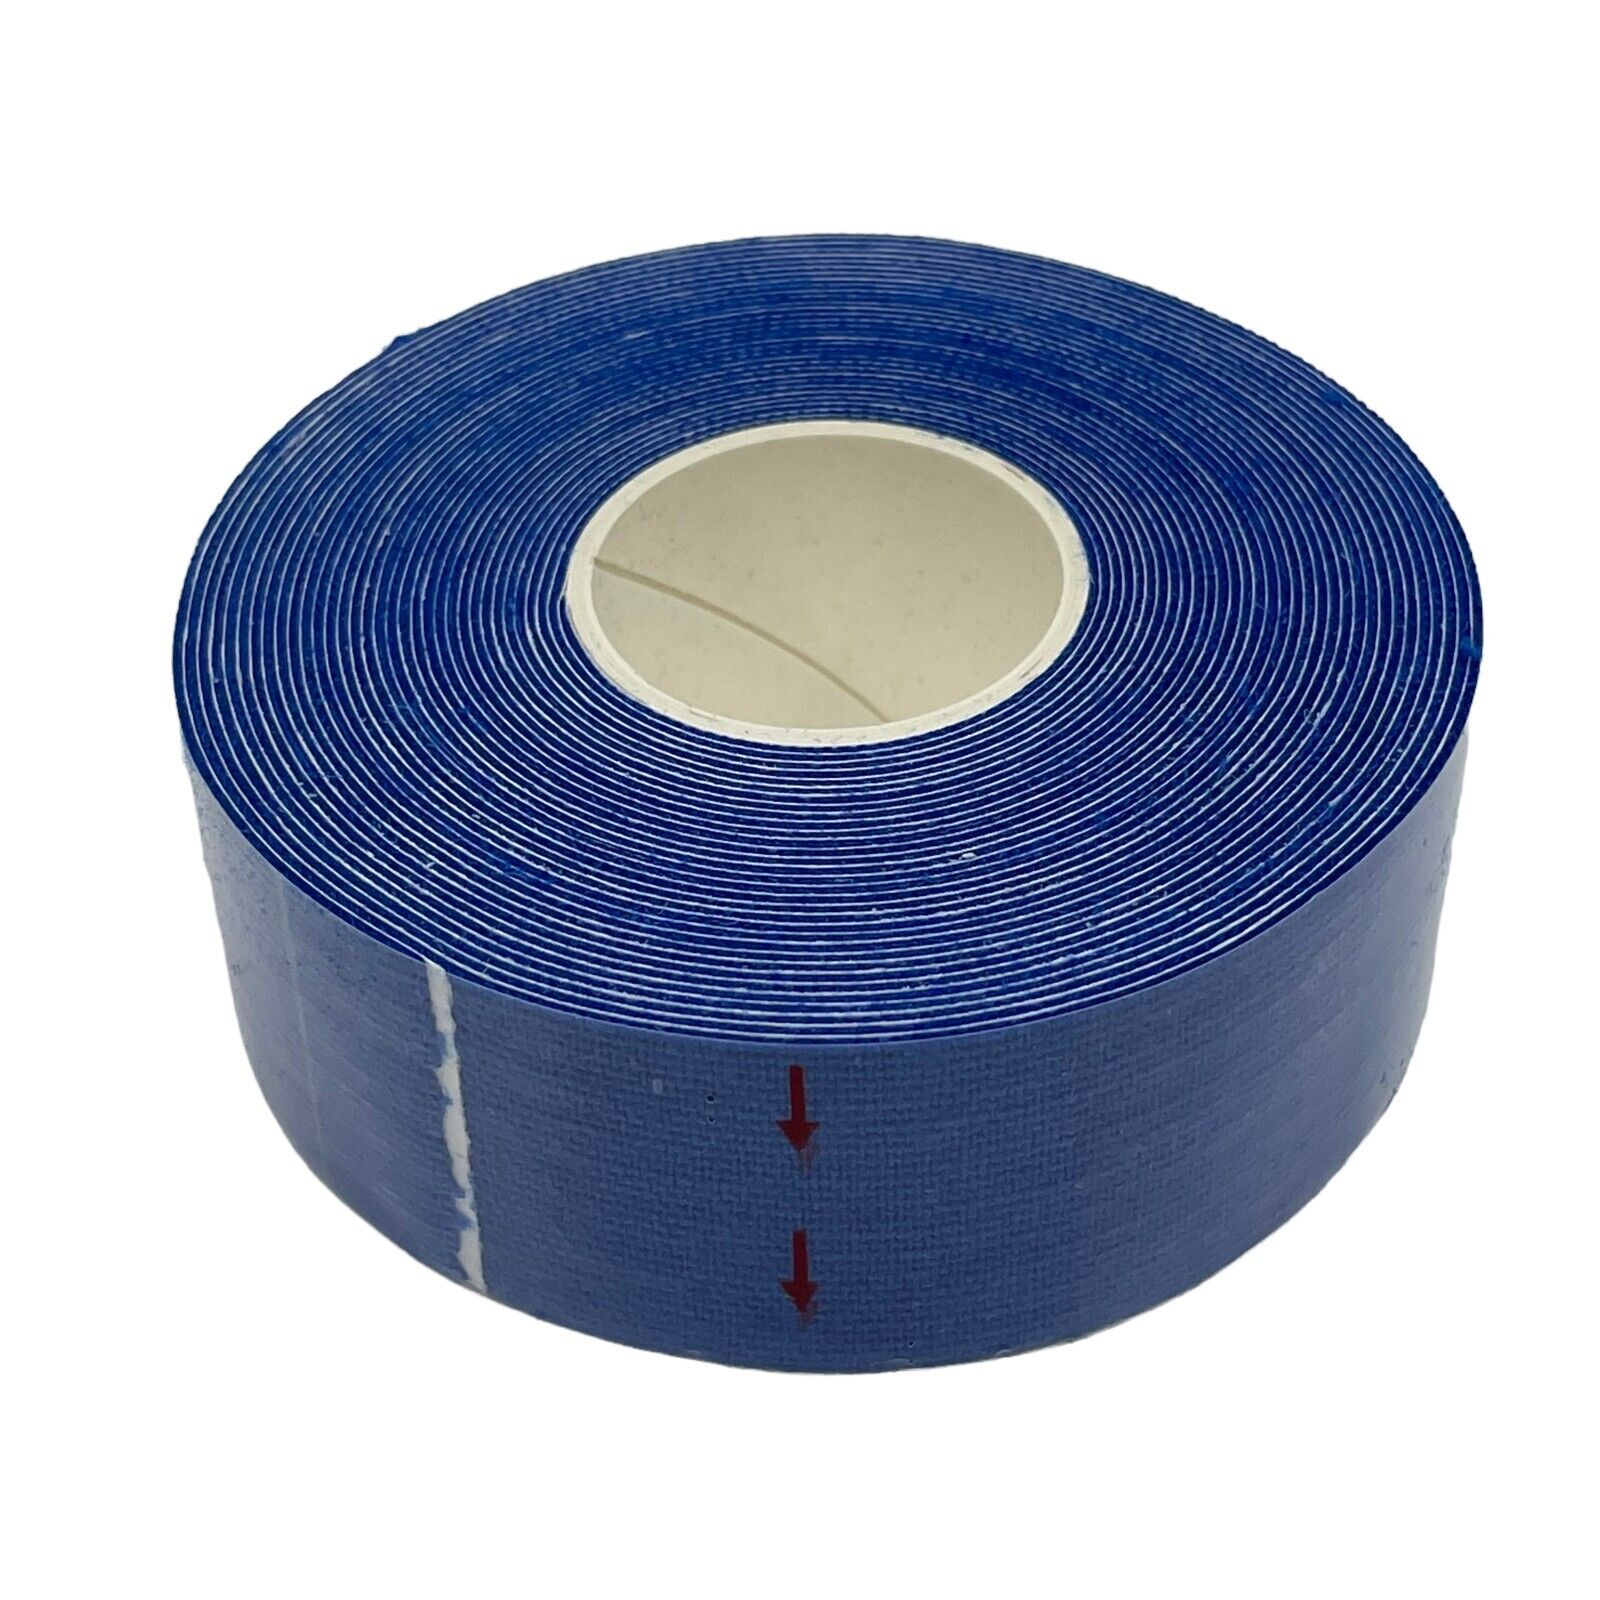 Wholesale Lot x 6 Rolls of Bowling Thumb Finger Hada Patch Protection Tape Unbranded Does Not Apply - фотография #10